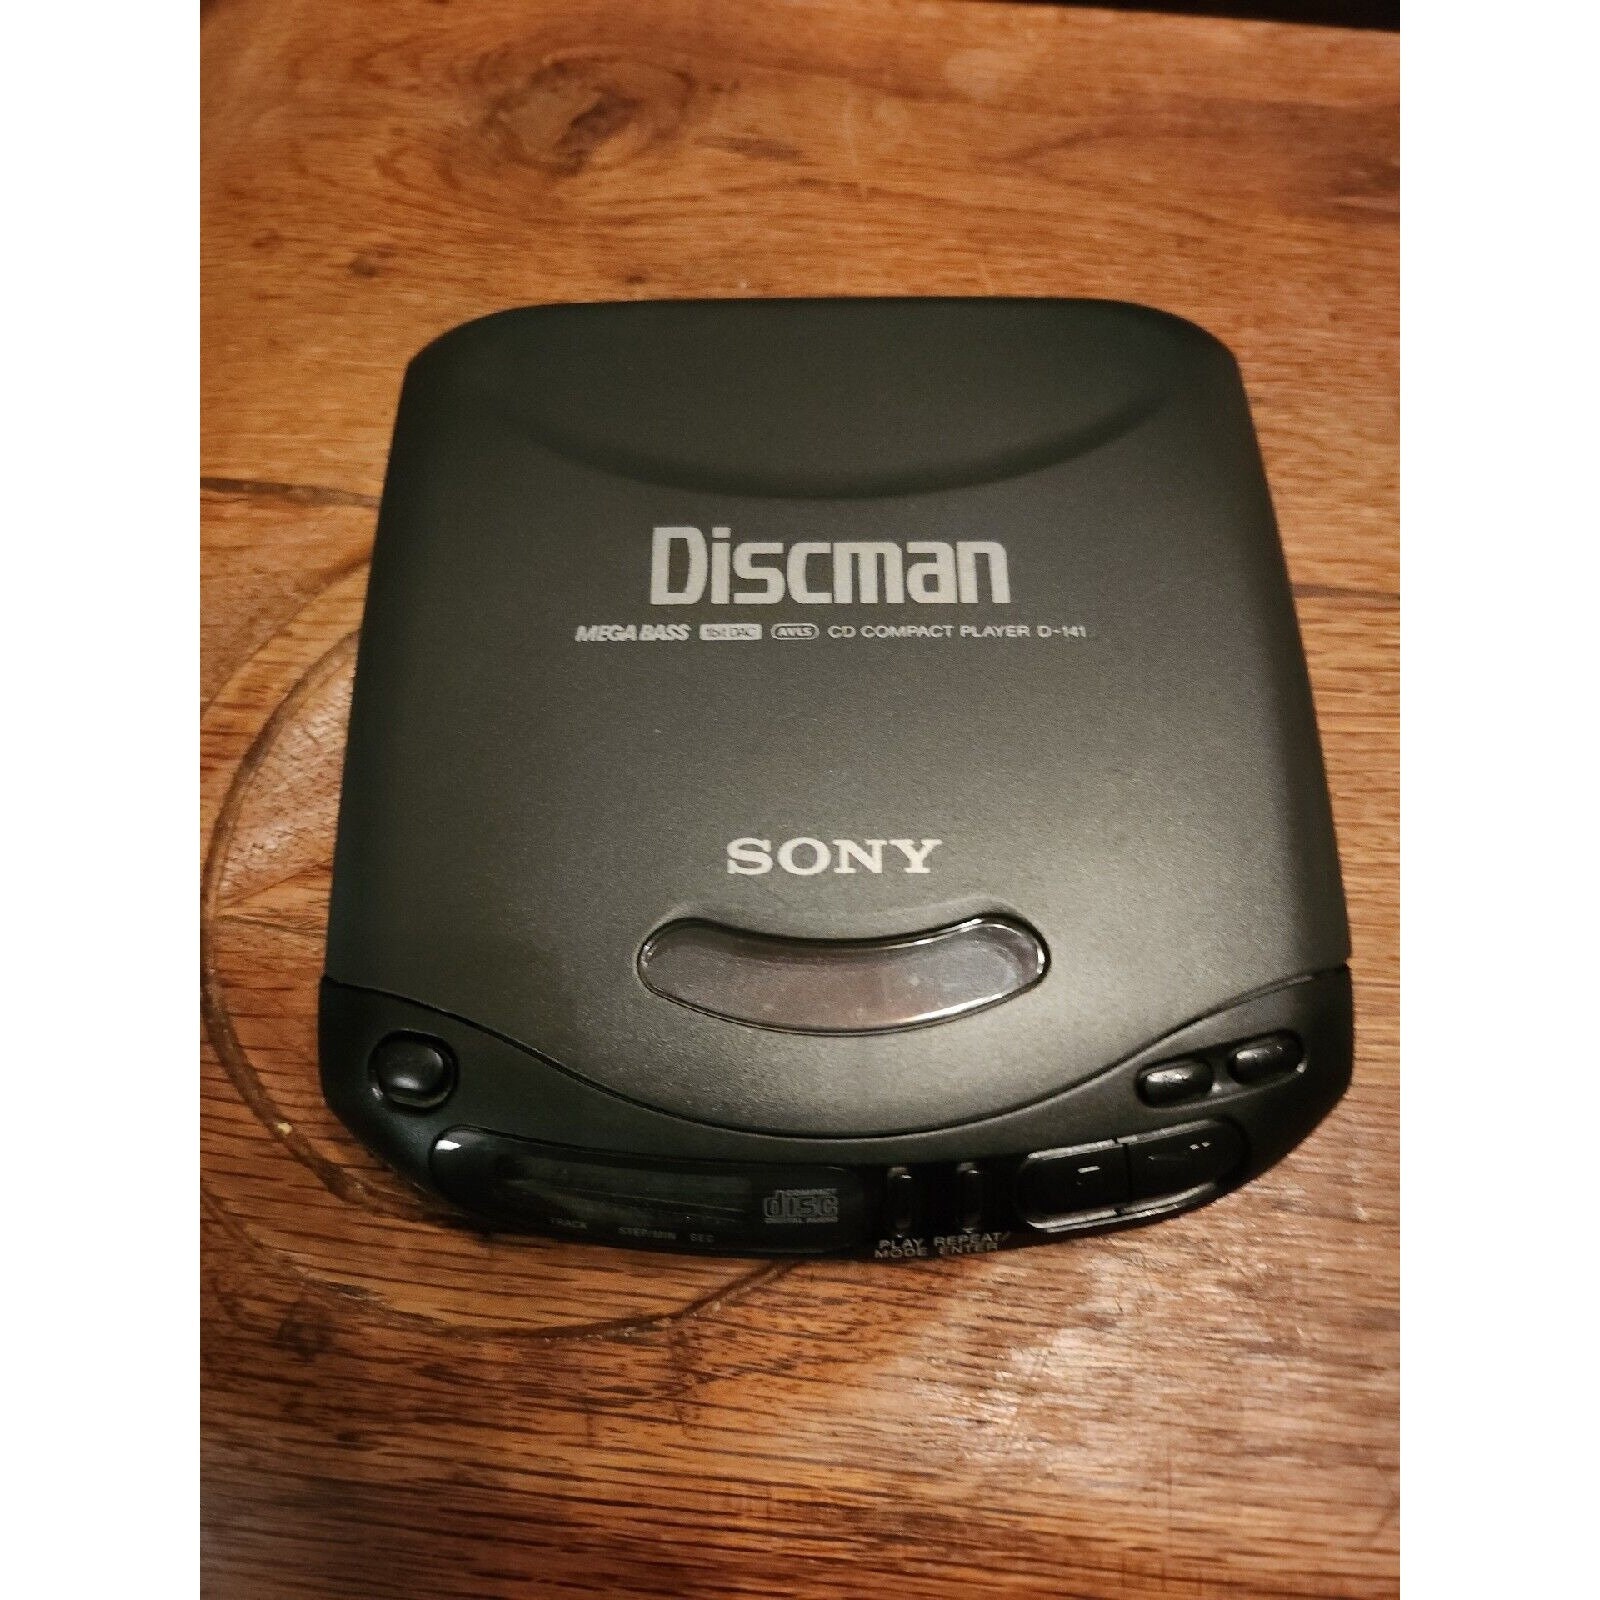 Sony discman CD player - computer parts - by owner - electronics